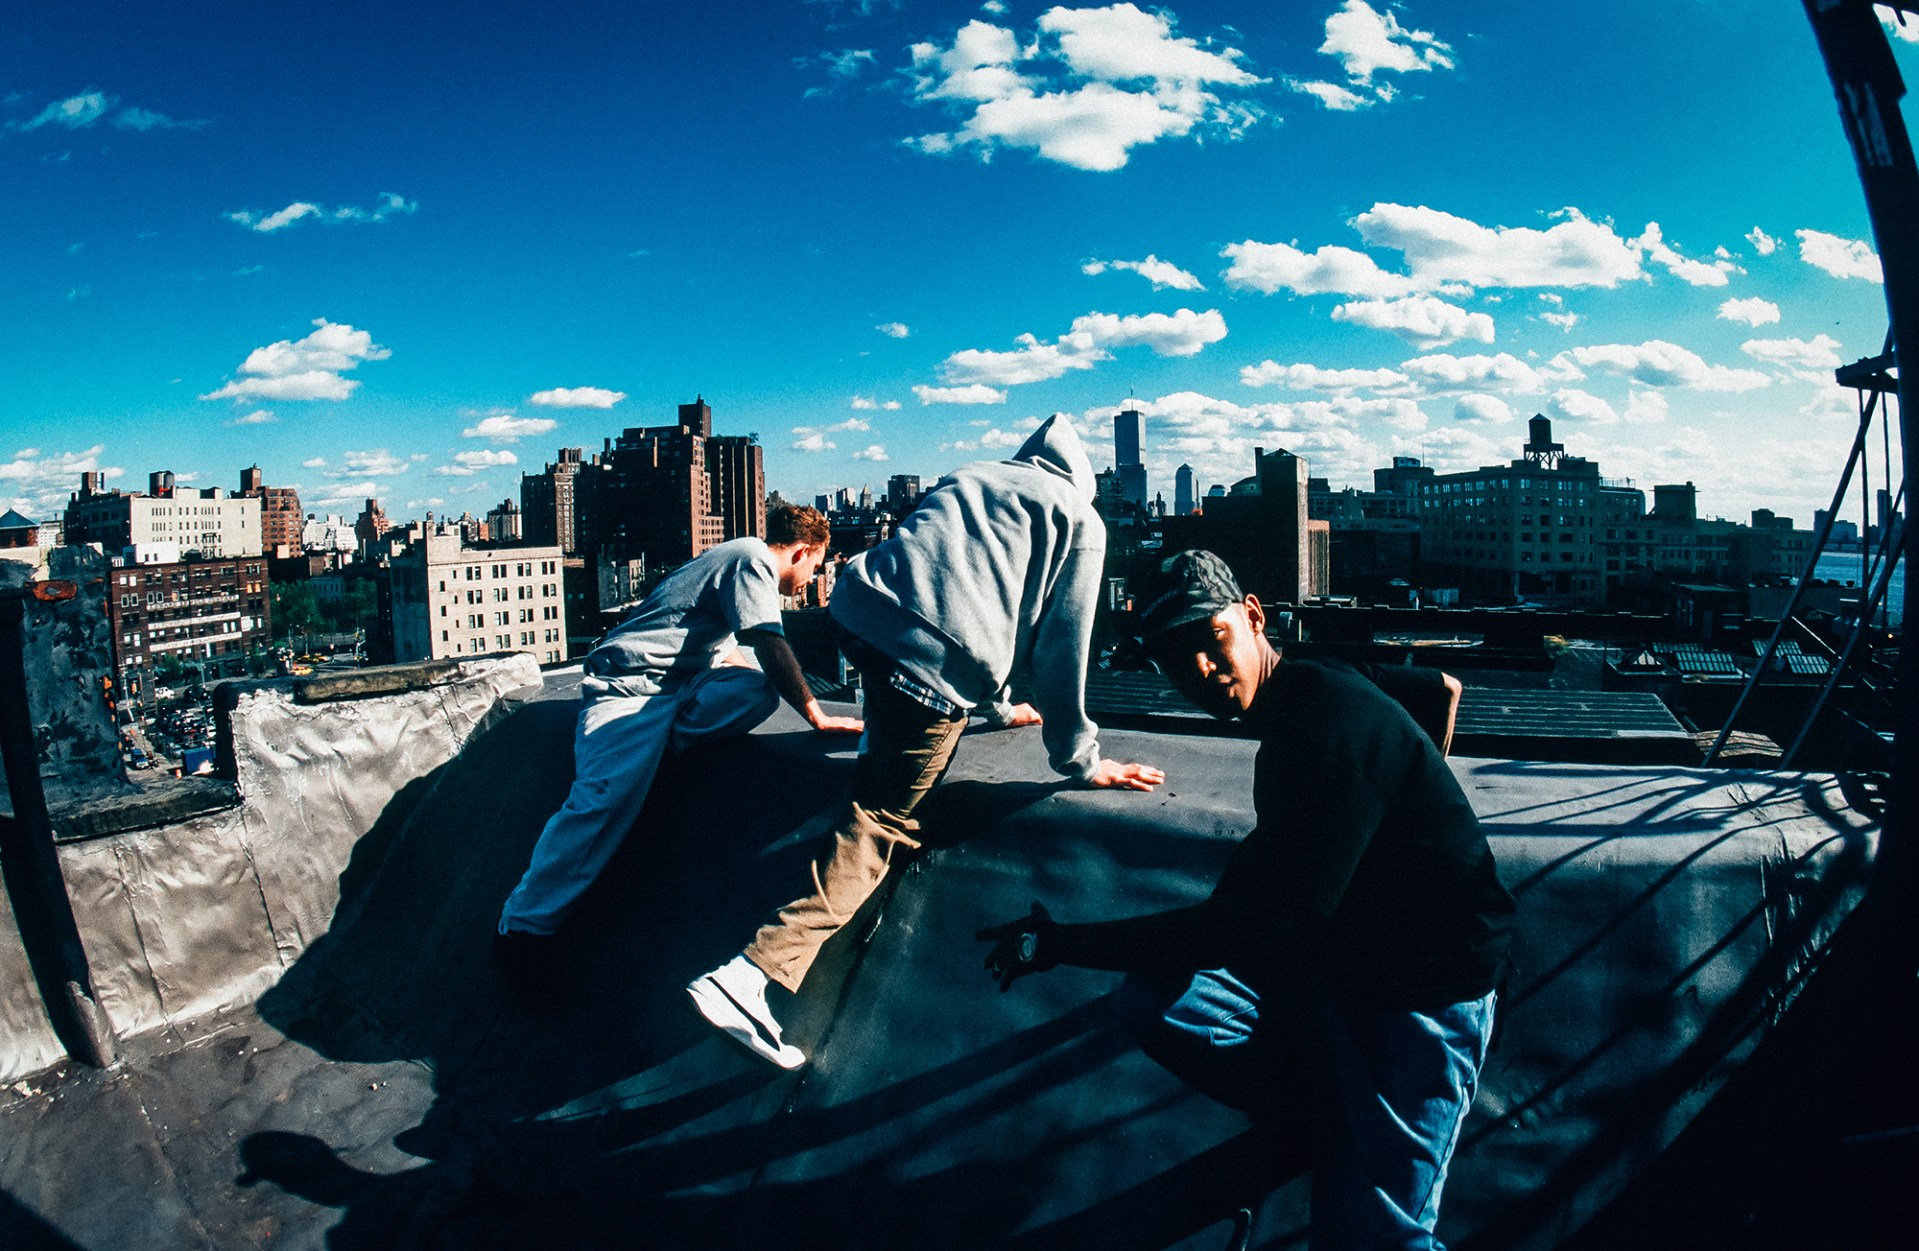 Meat Packing Rooftop, 1996